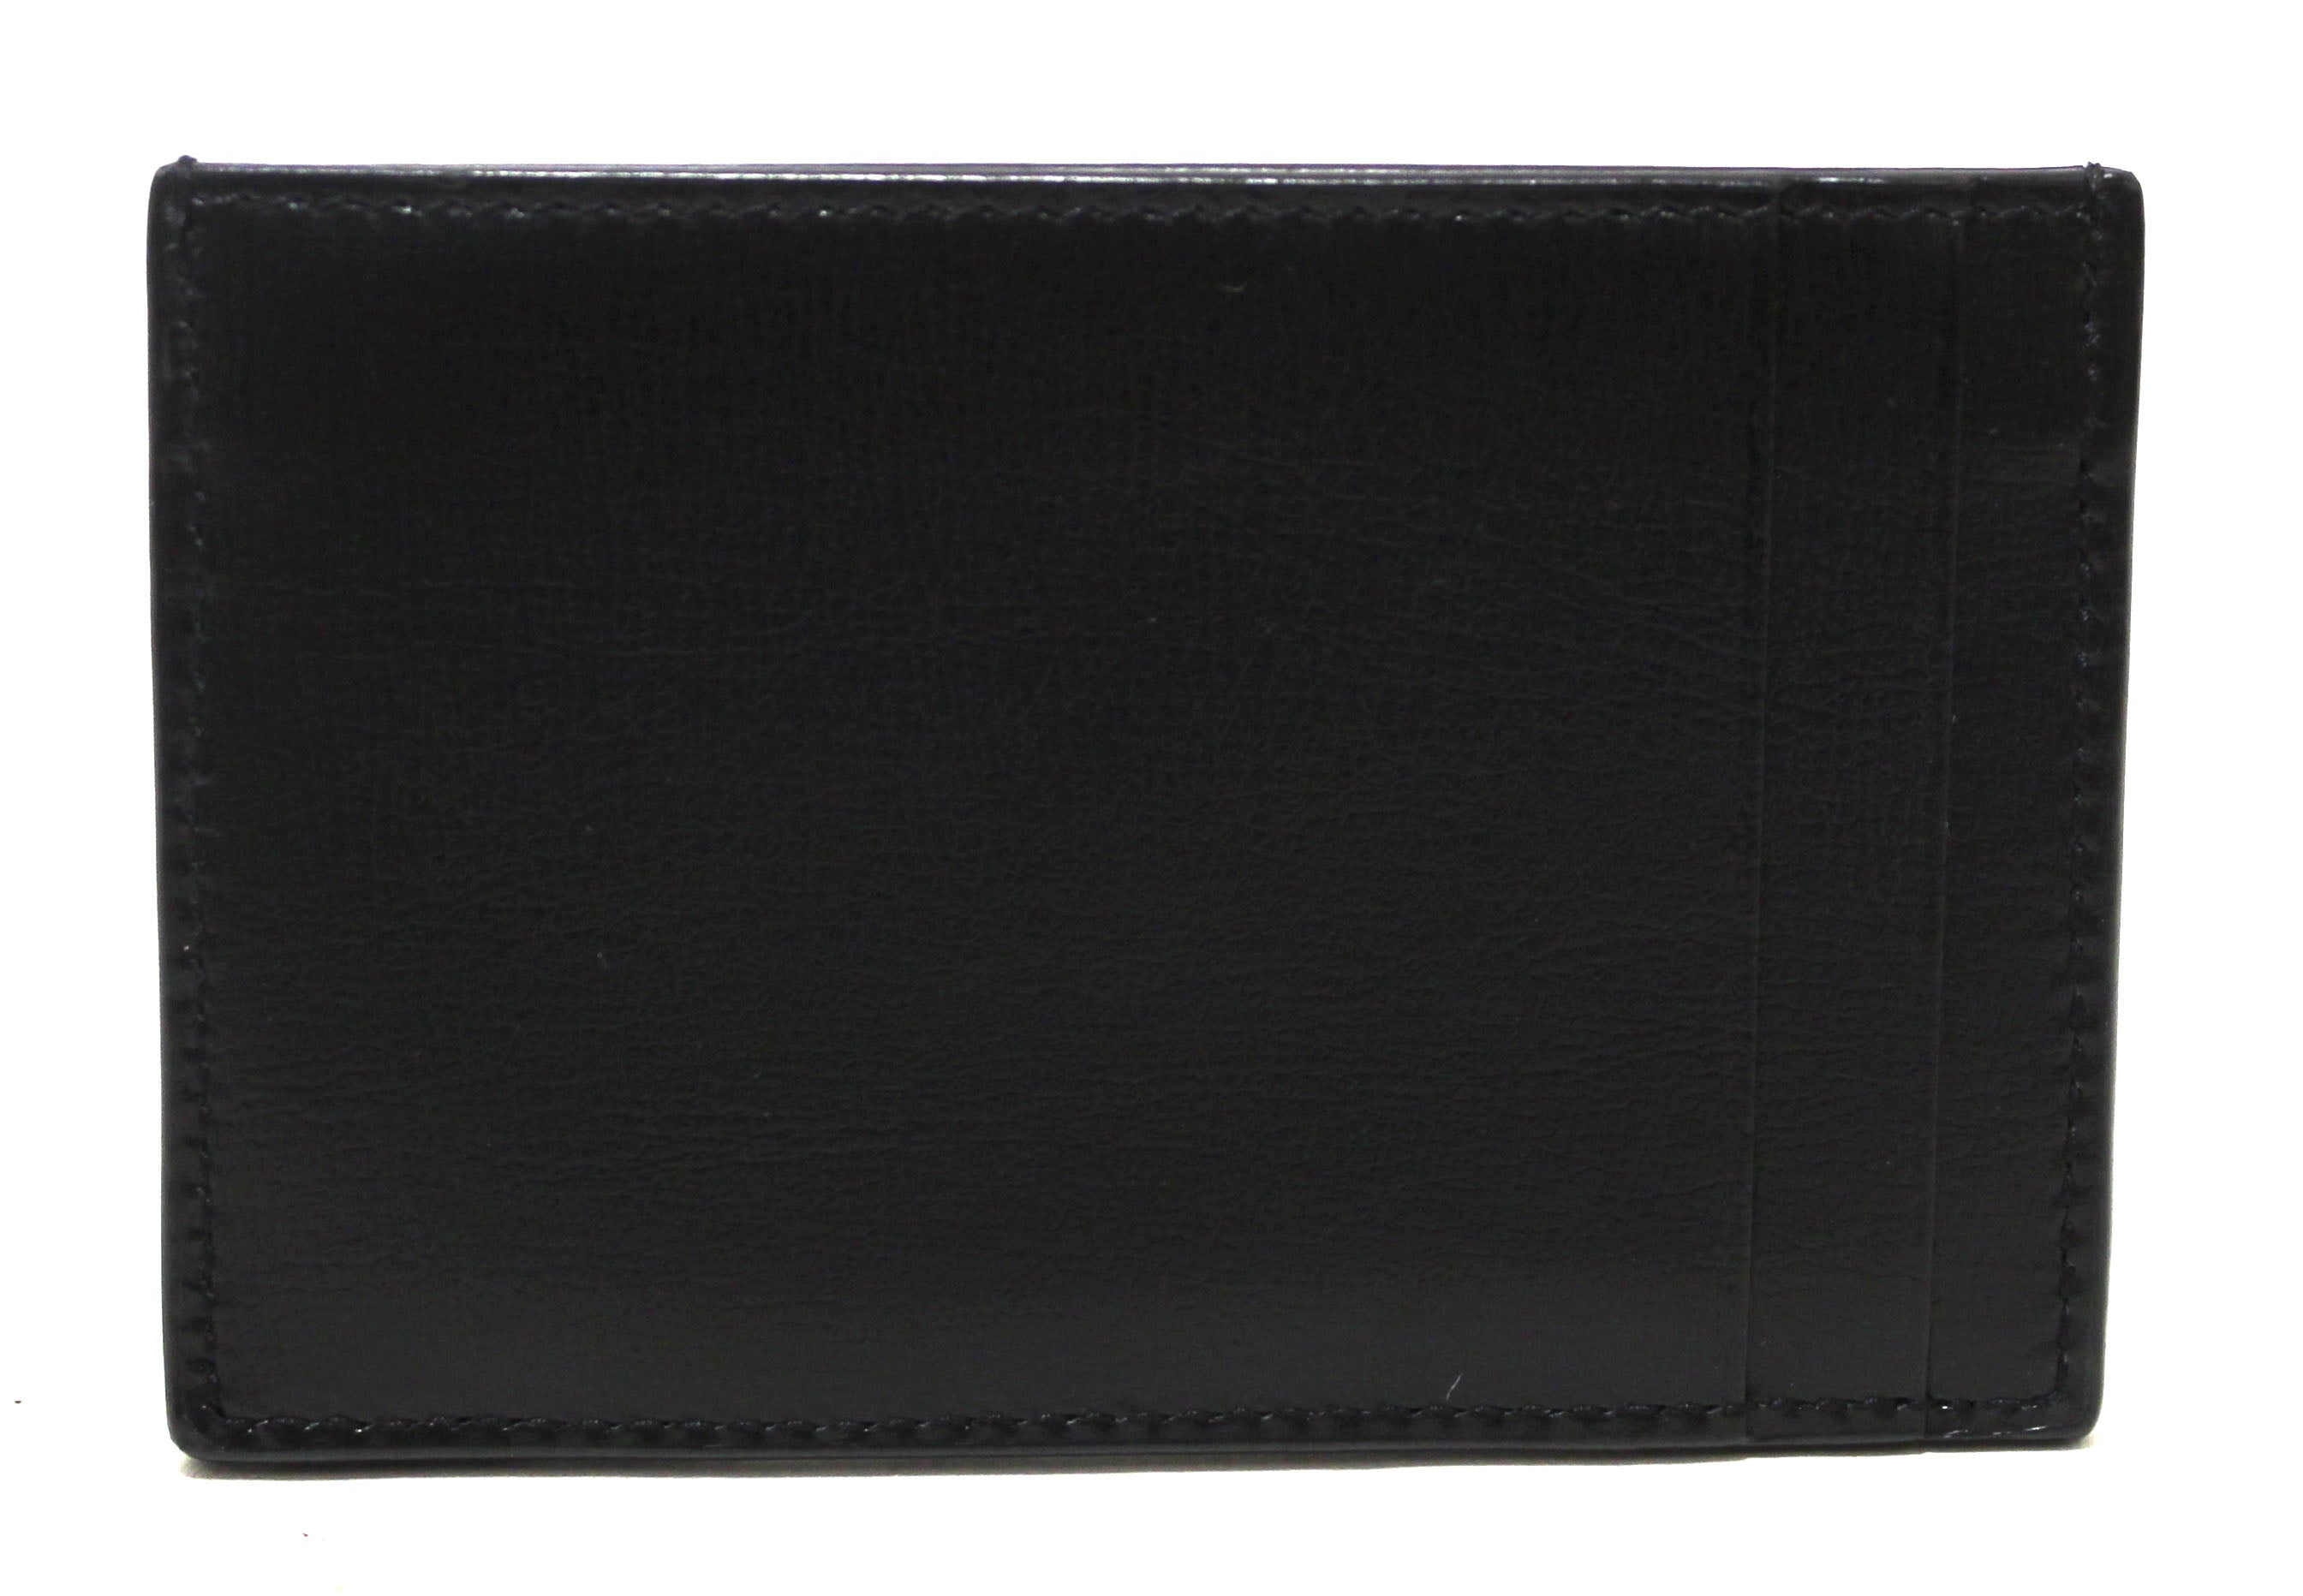 Authentic Saint Laurent Black Smooth Shiny Calfskin Leather Uptown Card Case